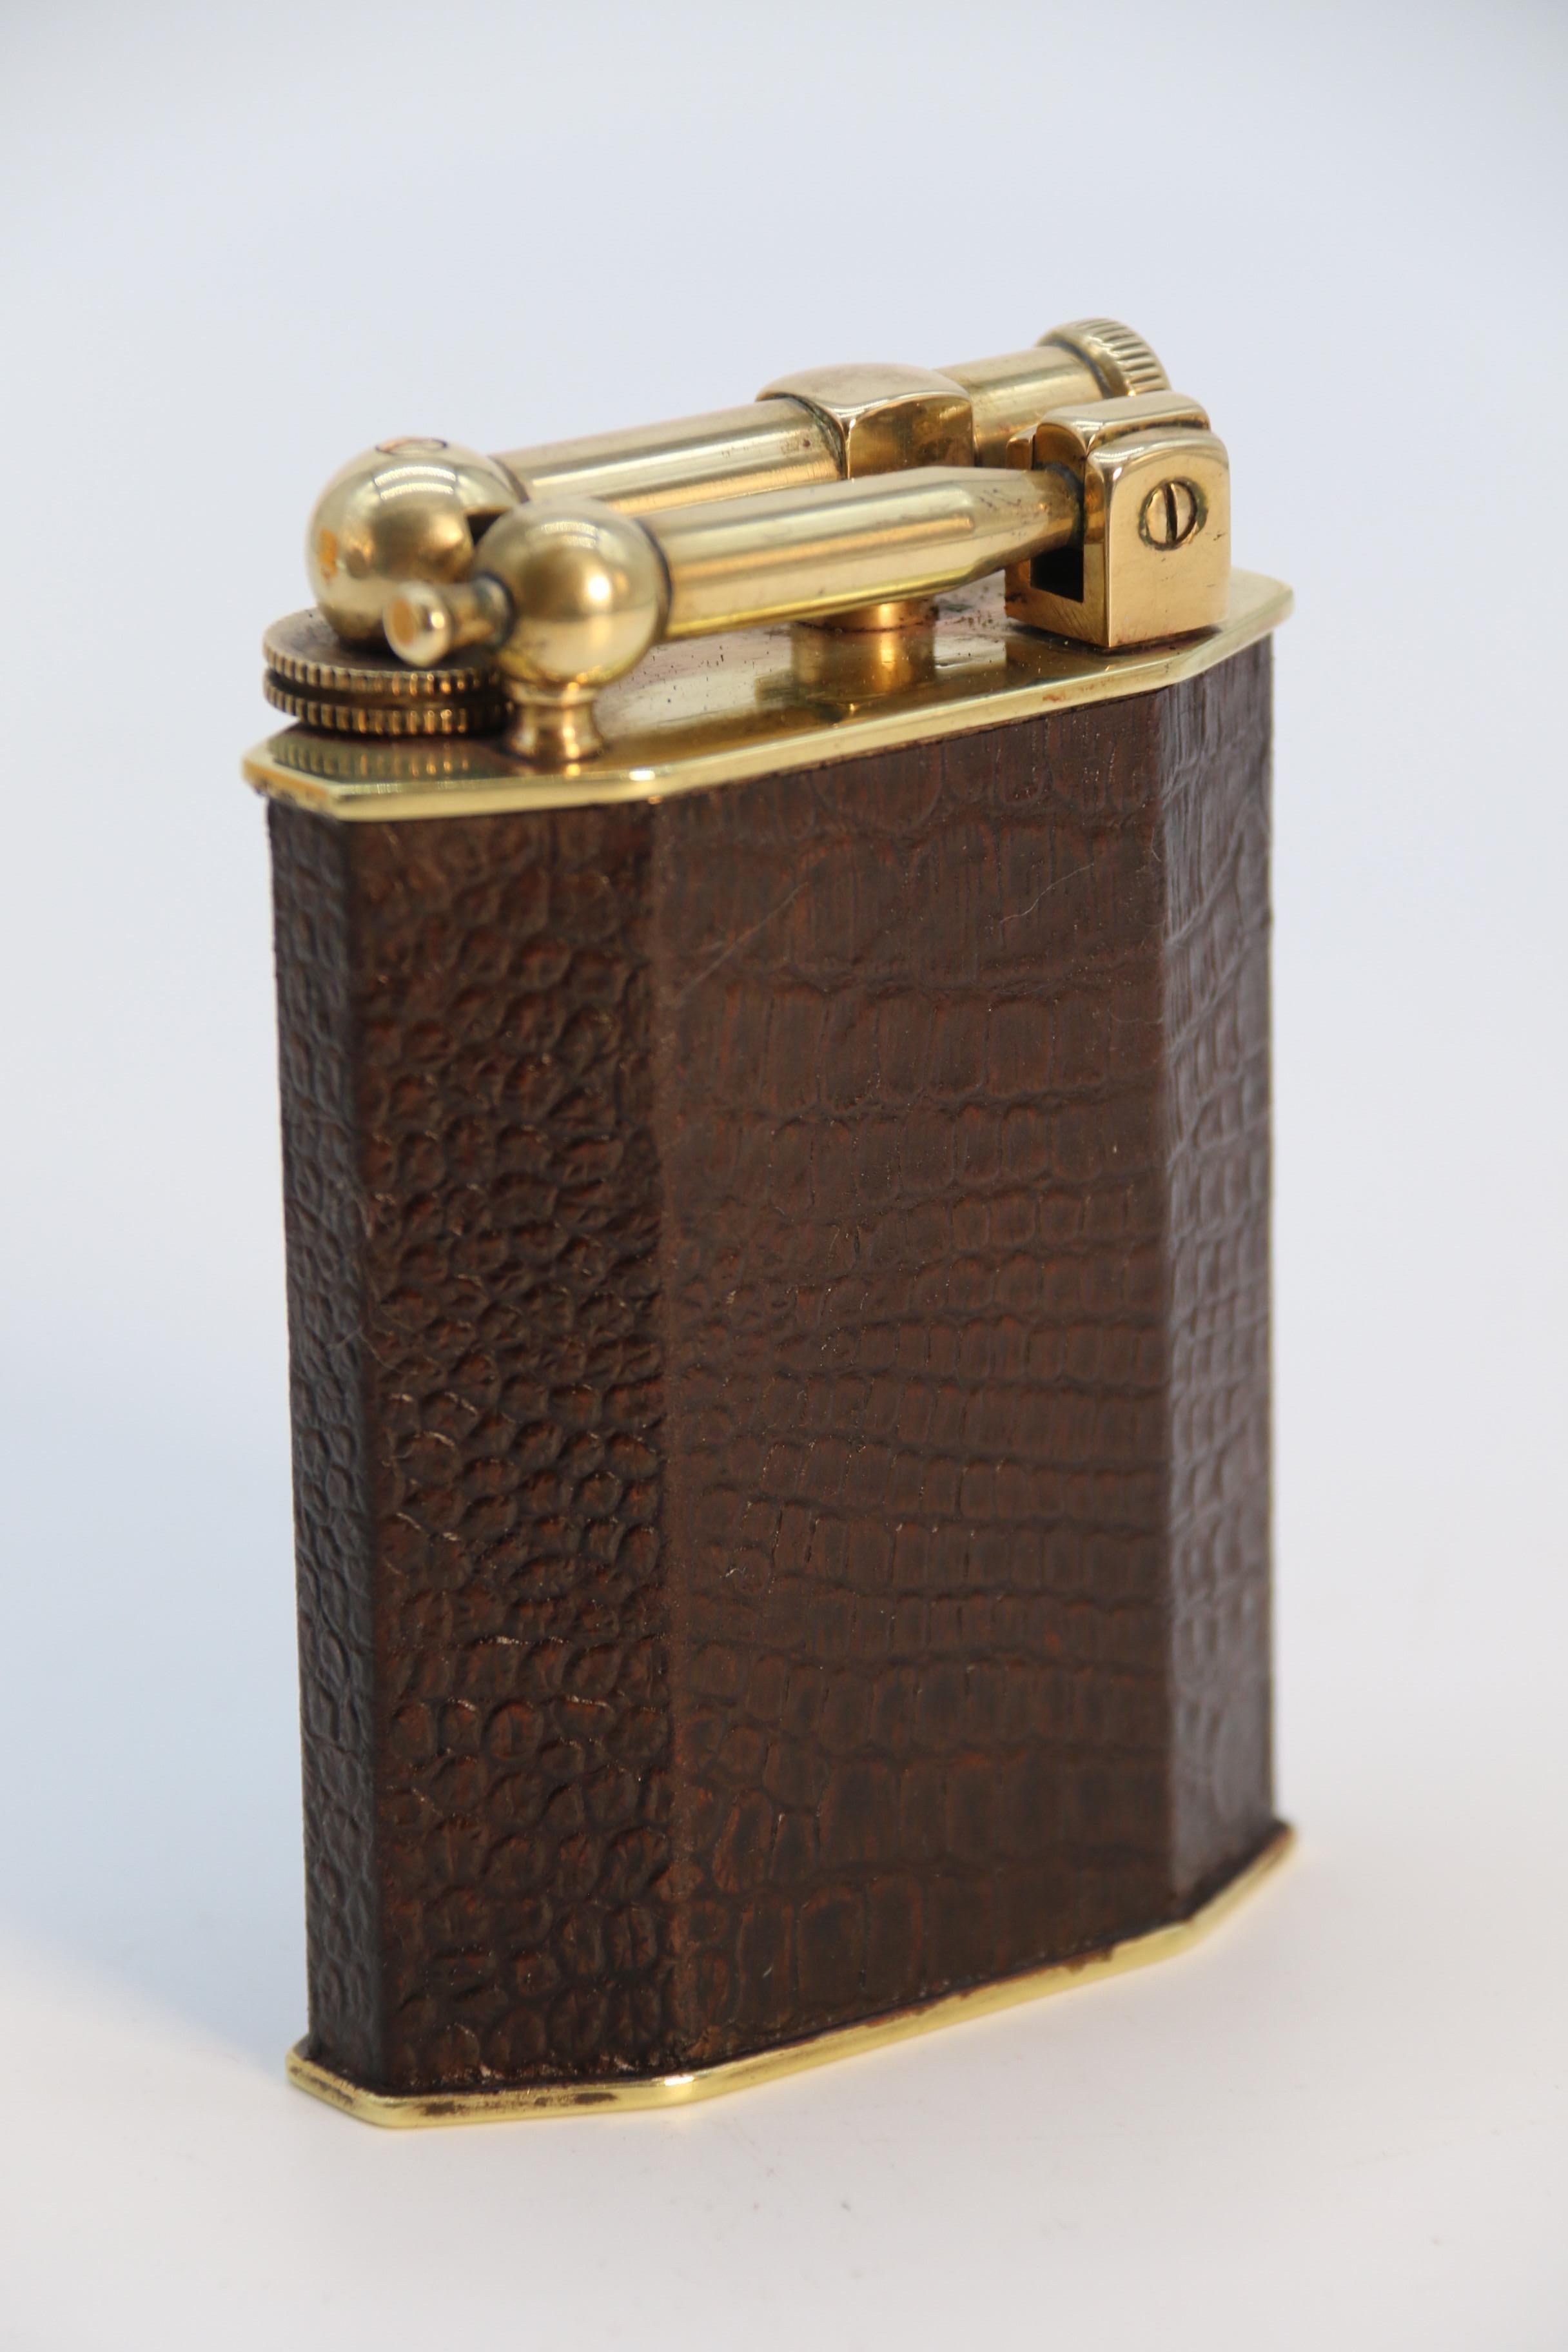 This superb large art deco table lighter is in remarkable original condition. It is a very eye catching 1920s object which is made very solidly from brass with beautifully engineered parts which all appear to work and function correctly including